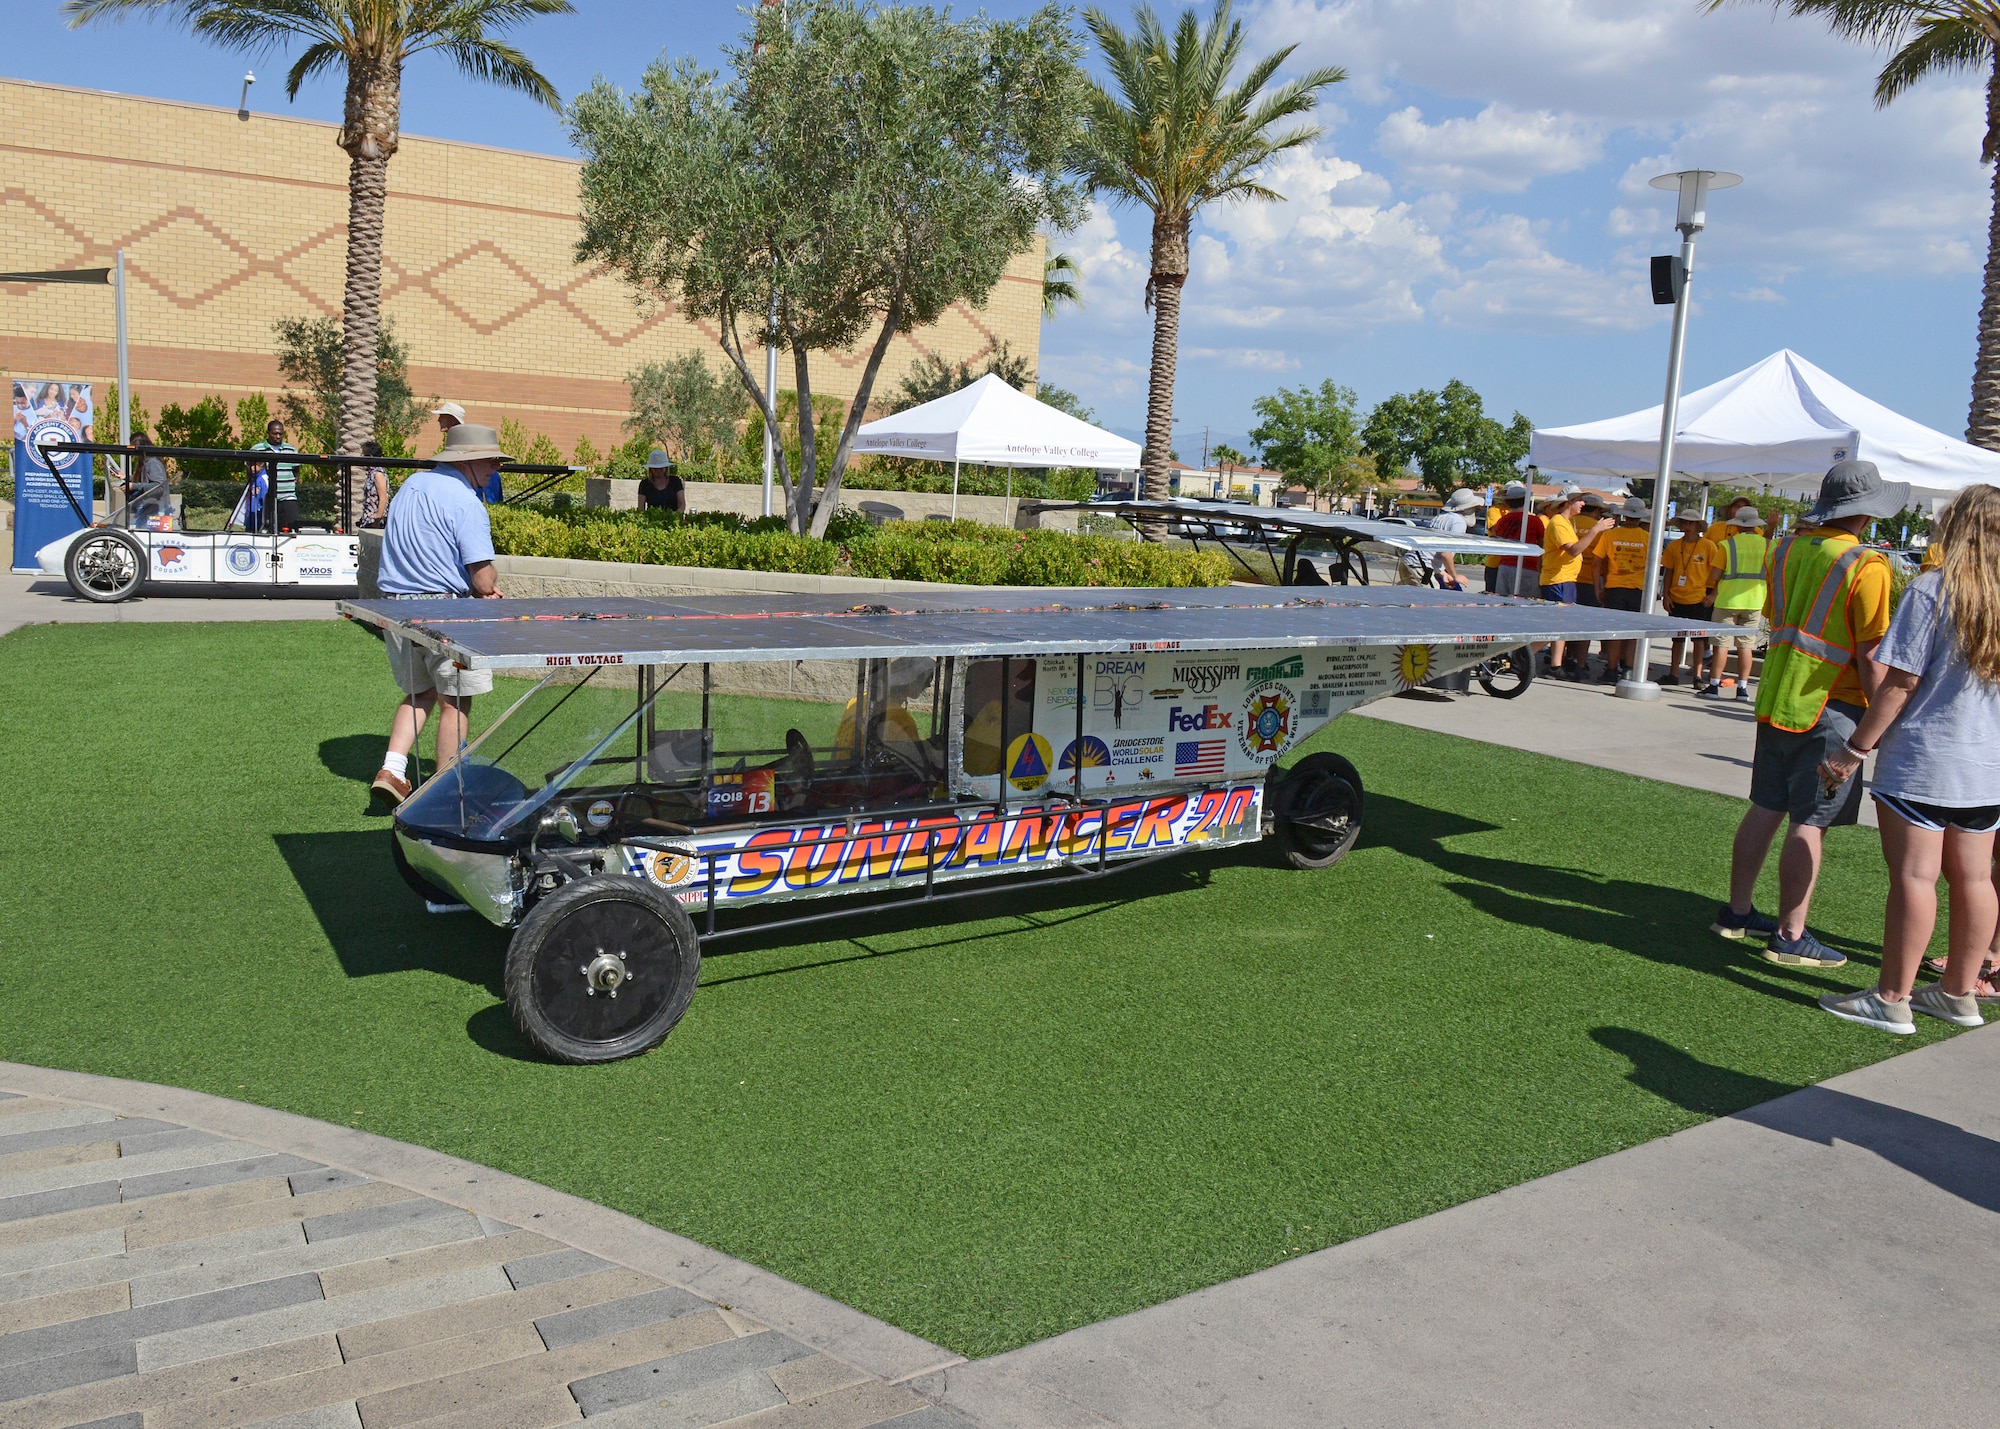 One of 26 custom-built cars that made their way across the United States on a trek that ended at the Antelope Valley Mall in Palmdale, California, July 23 for the finale of this year’s Solar Car Challenge. Each car was powered only by the sun’s energy. (U.S. Air Force photo by Kenji Thuloweit)